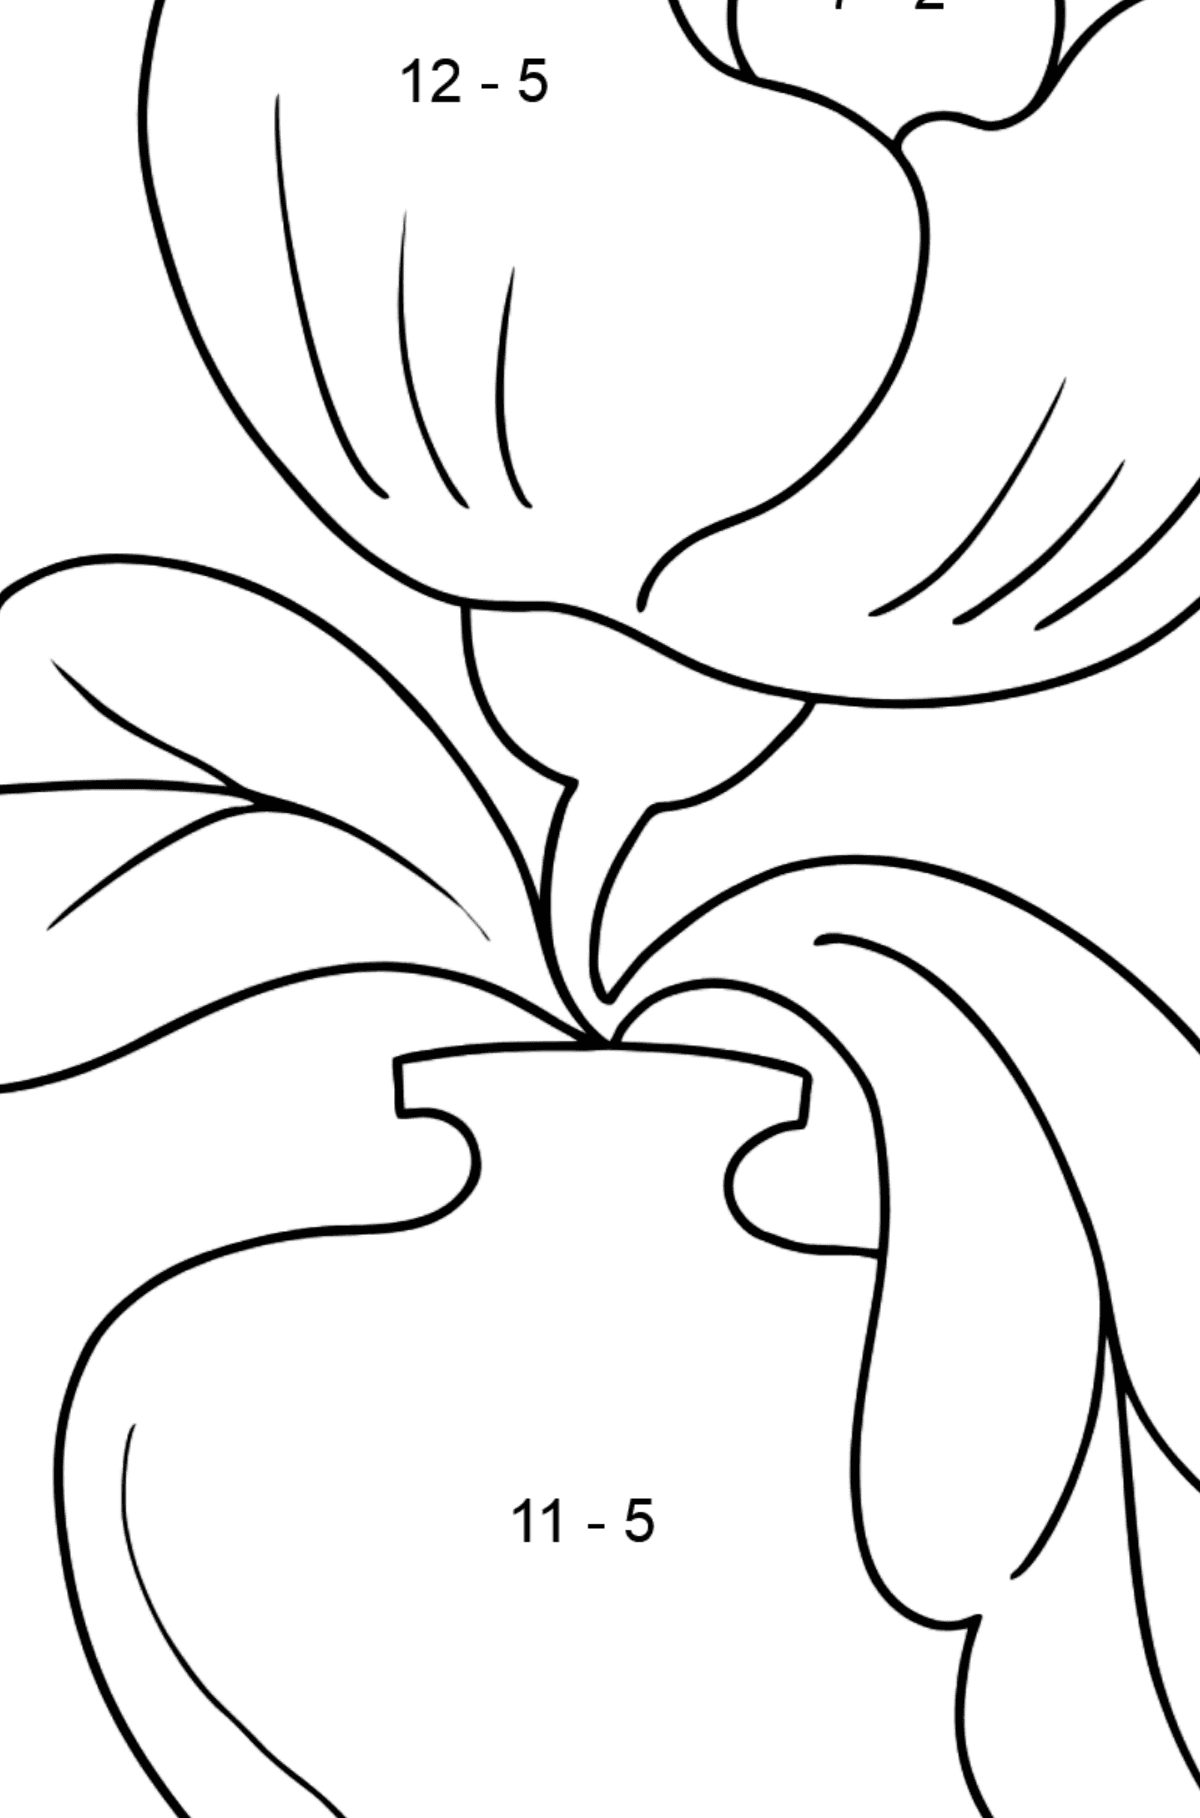 Coloring Page - flowers in a vase - Math Coloring - Subtraction for Kids